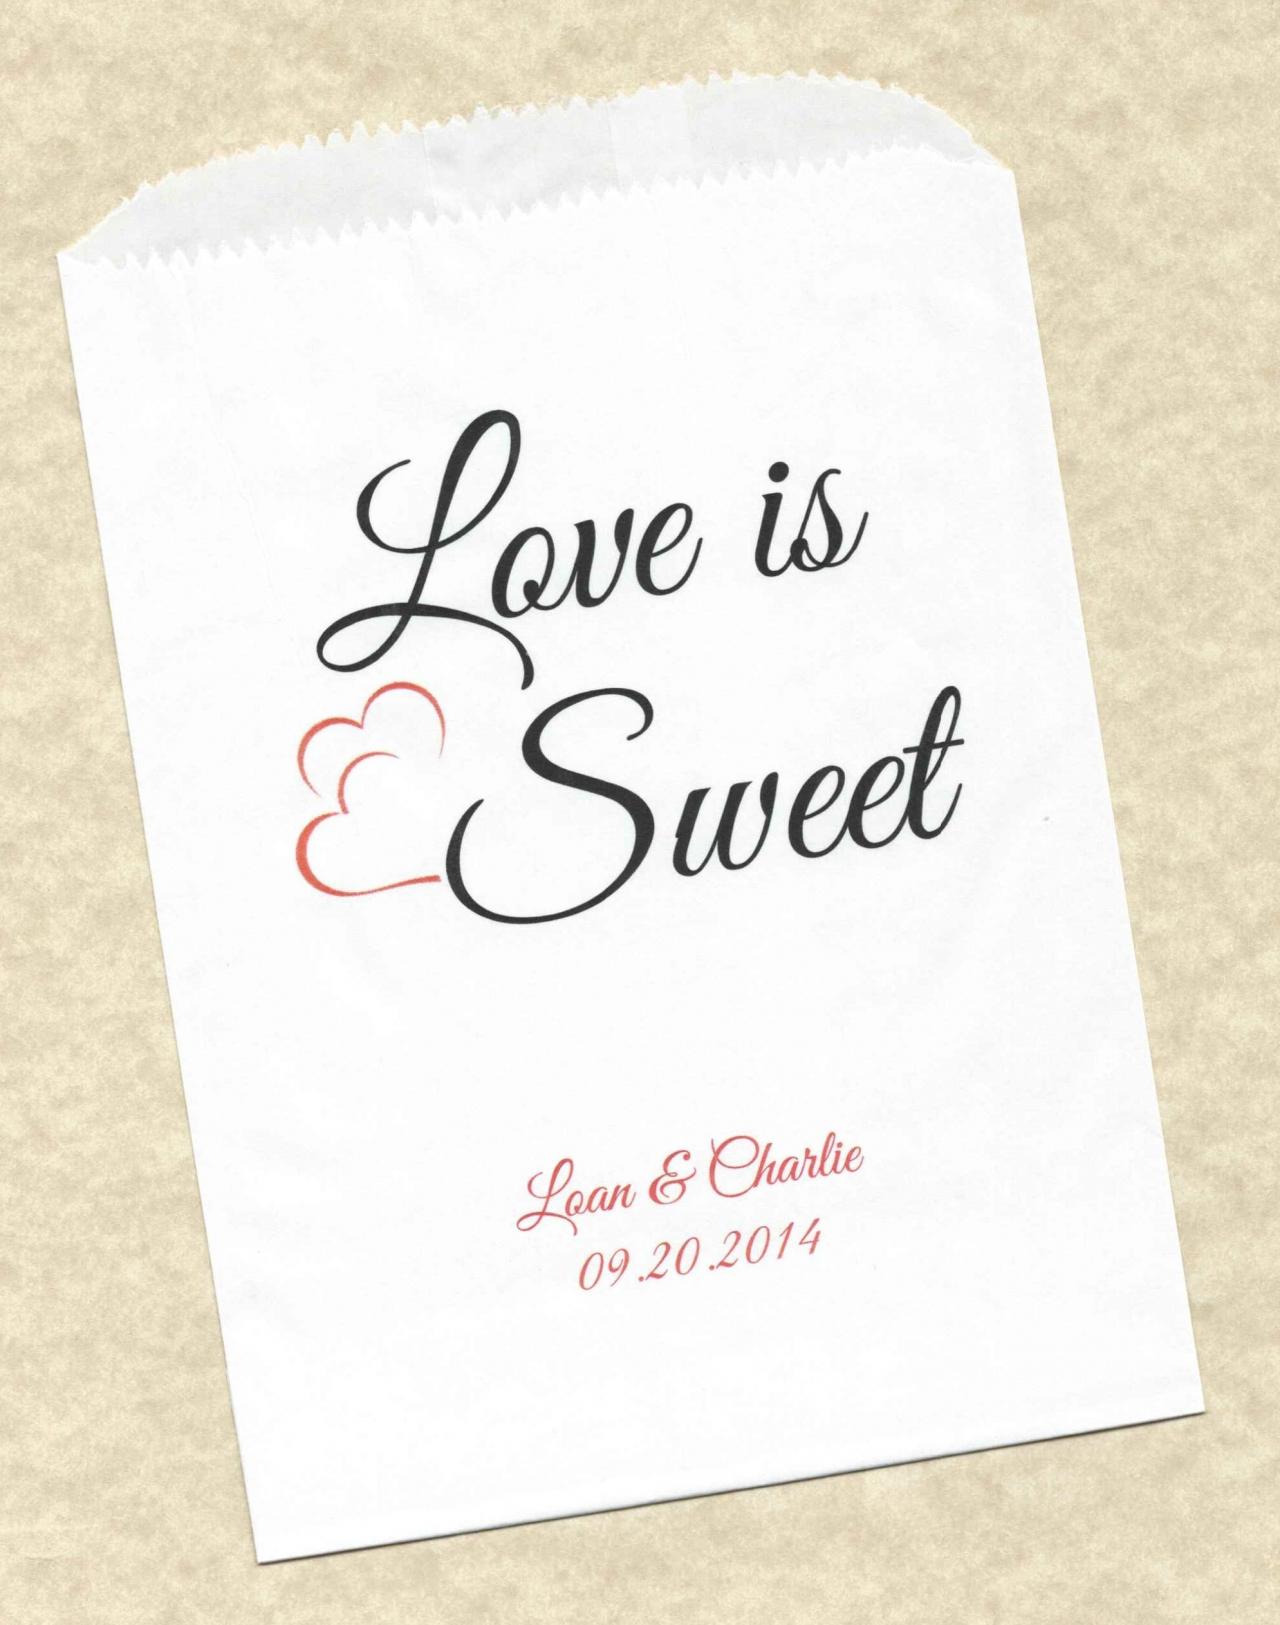 50 Love Is Sweet Wedding Personalized Candy Buffet Party Favor Bags - Personalized Paper Bags